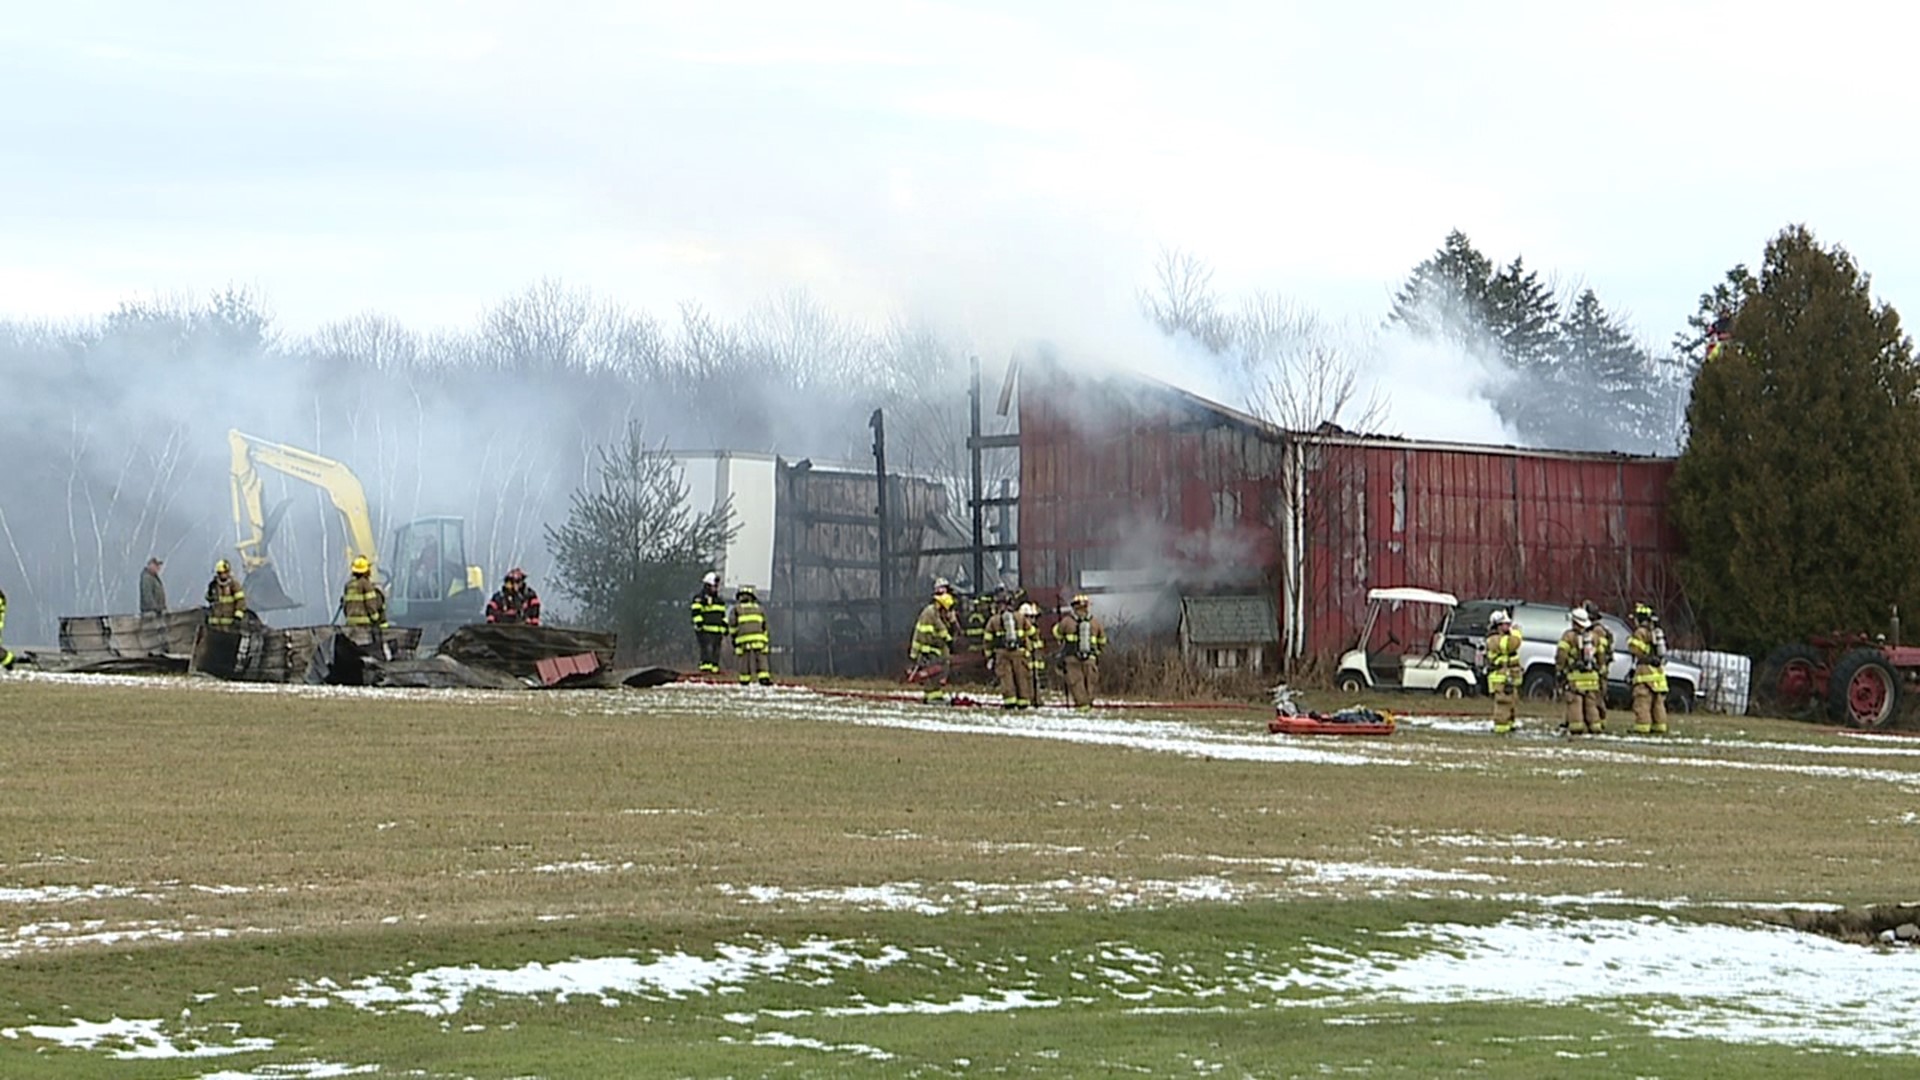 Flames broke out at the place around 1 p.m. Sunday afternoon in Jefferson Township.